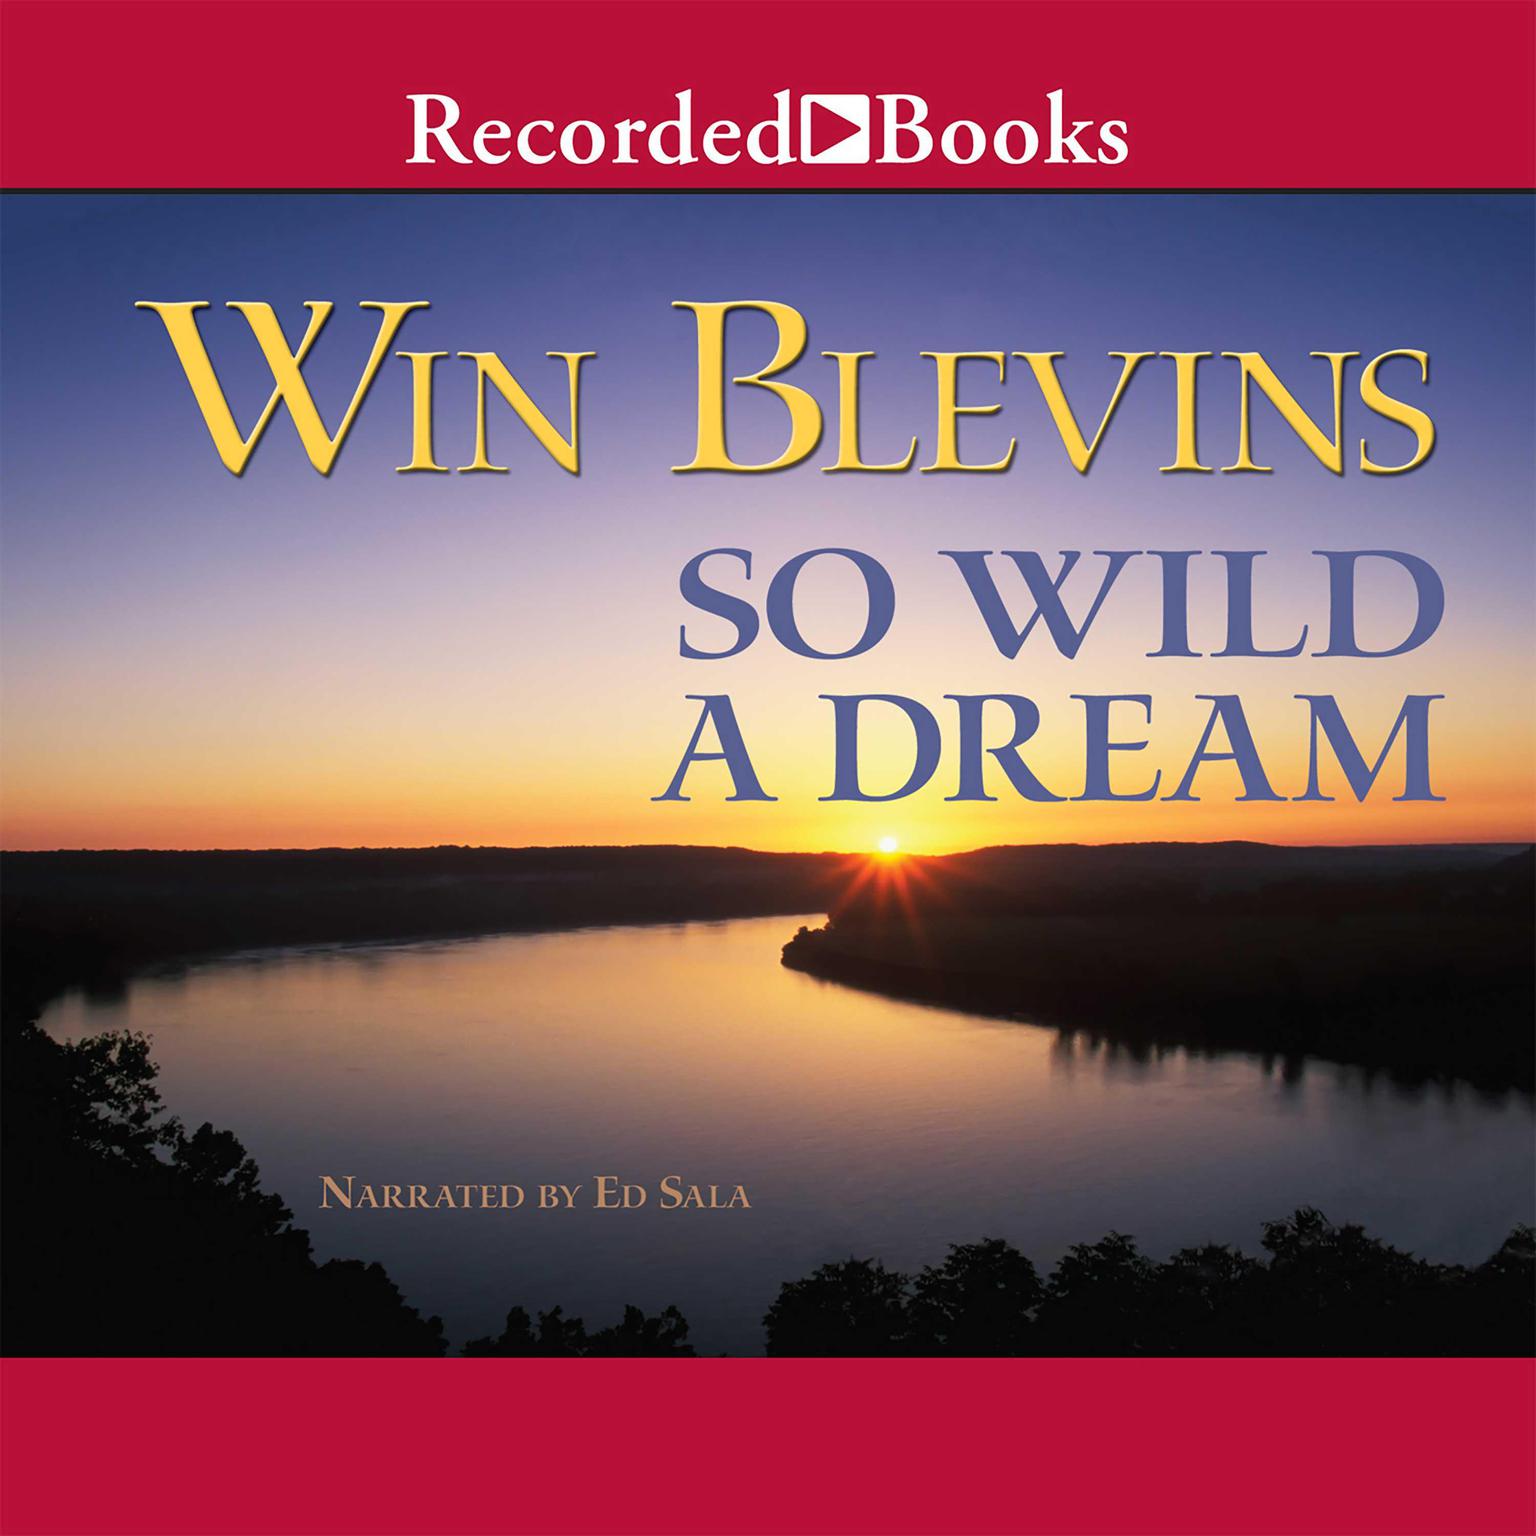 So Wild a Dream Audiobook, by Win Blevins